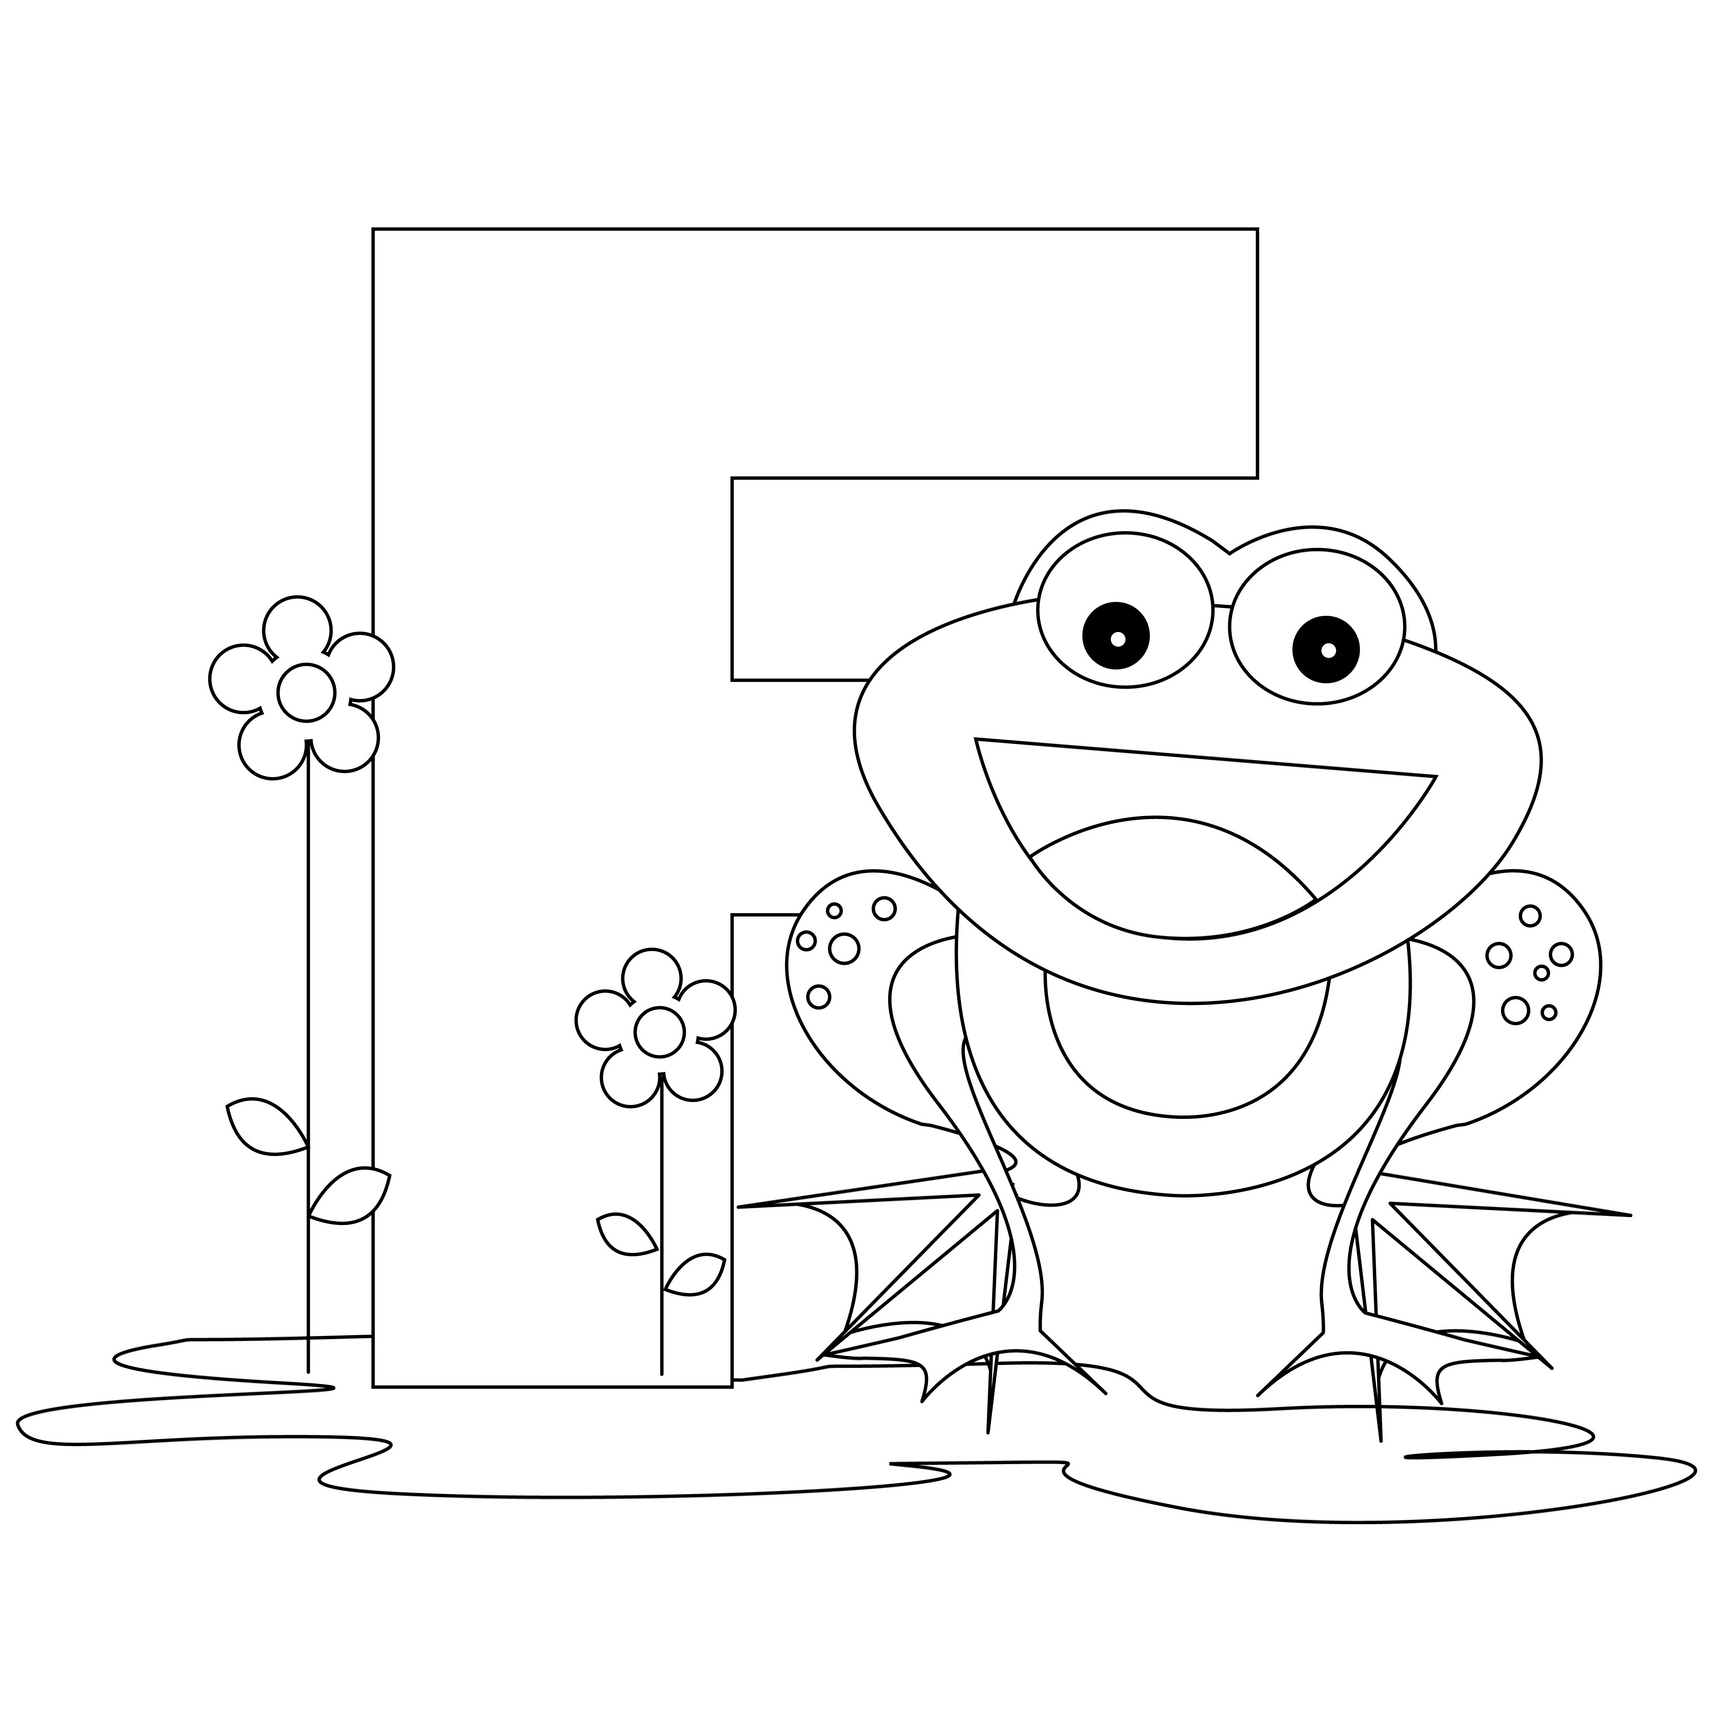 Coloring Pages : Marvelous Alphabetters Coloring Pages Preschoolter - Free Printable Alphabet Letters Coloring Pages